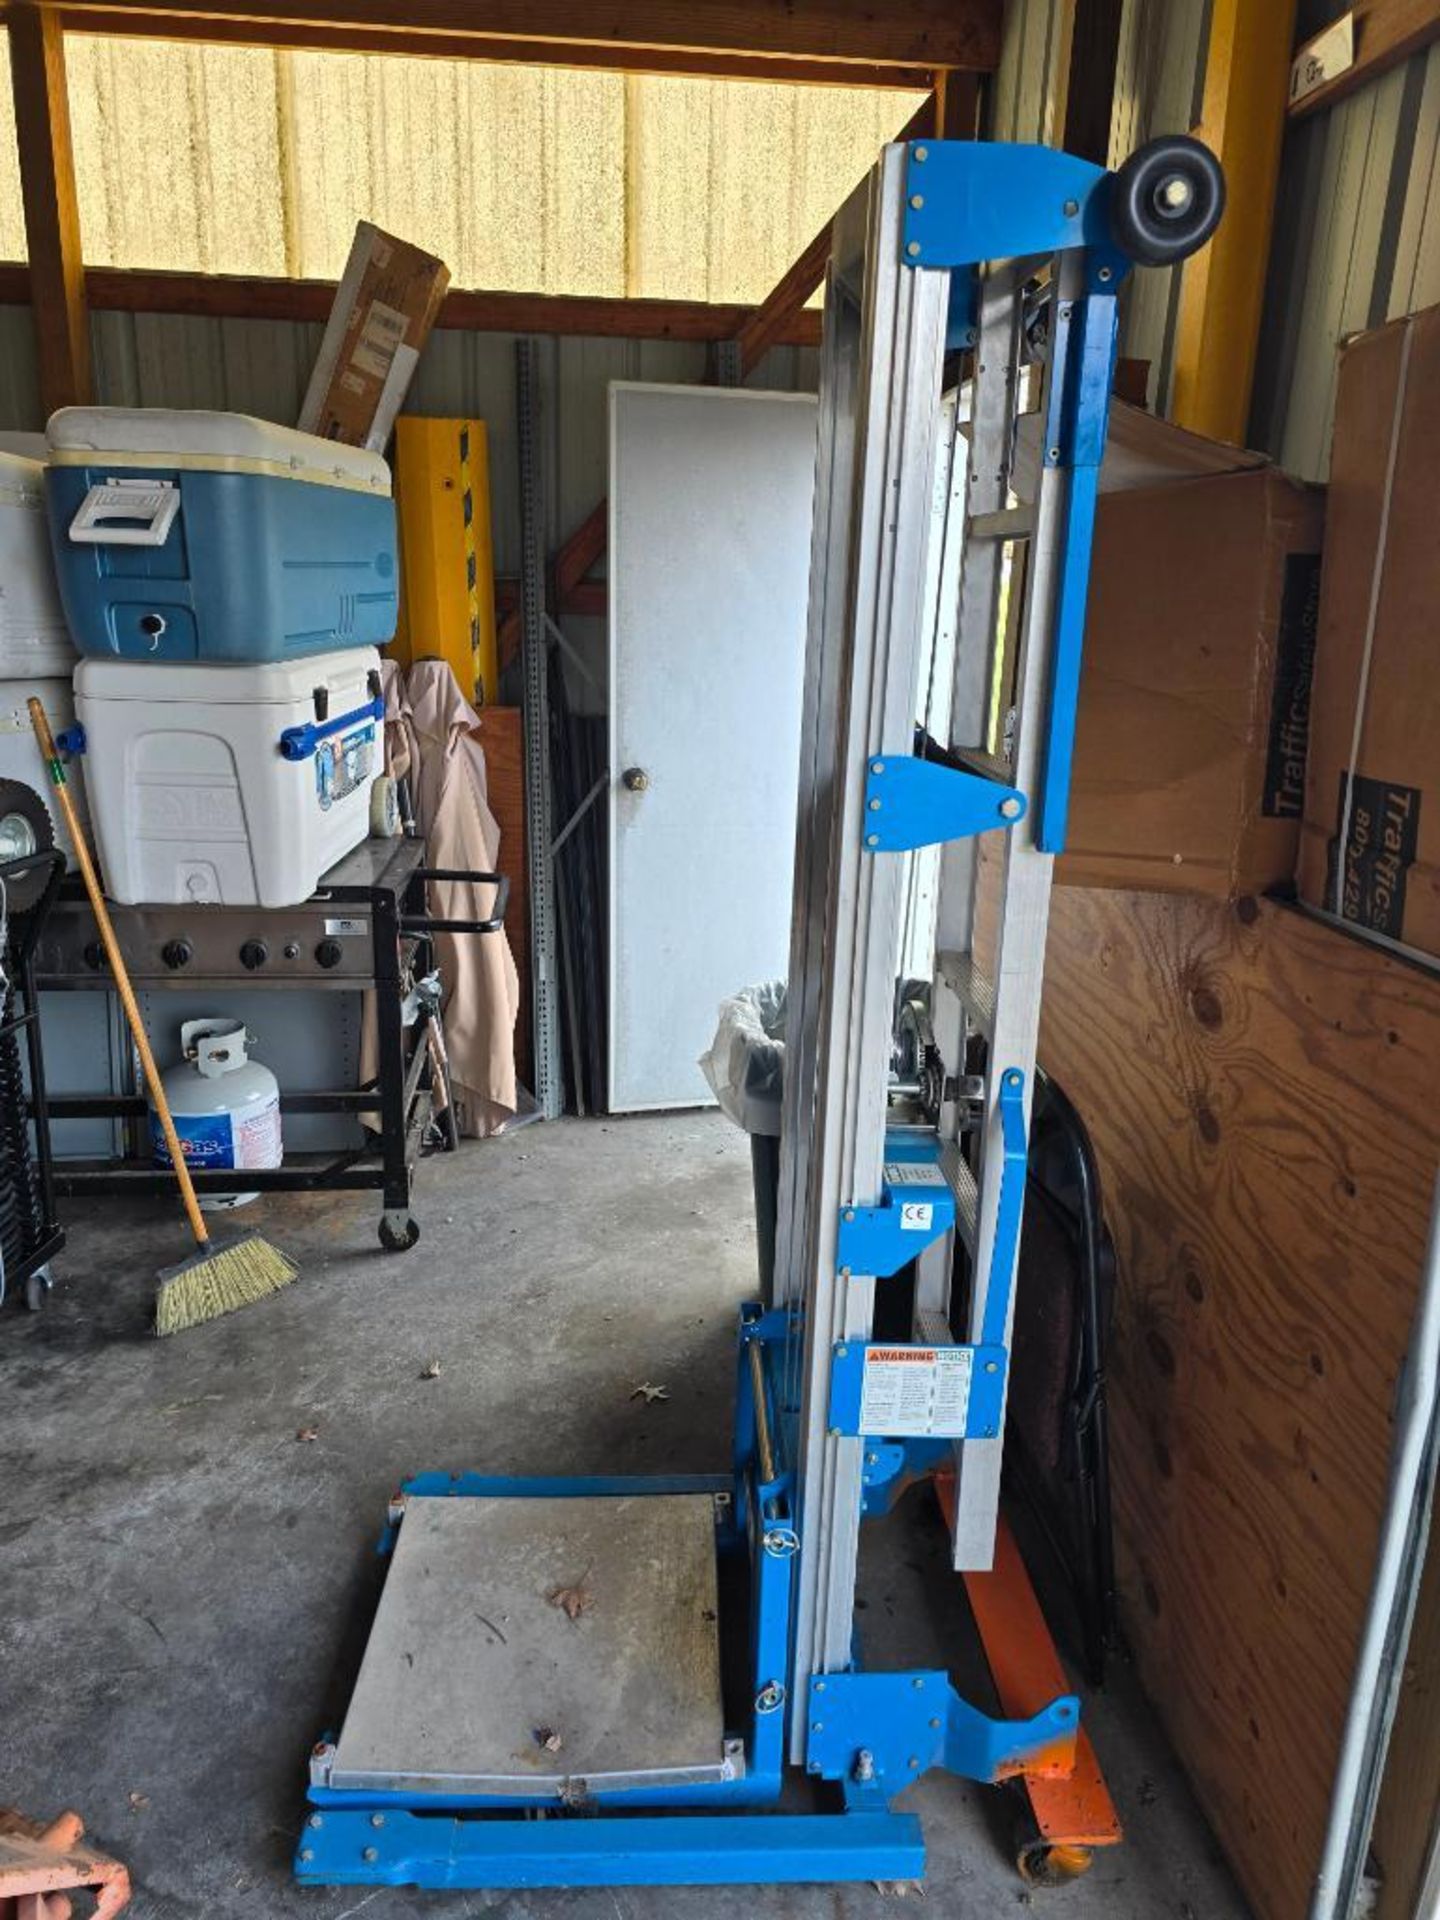 Genie Mechanical Material Lift, 350 LB. Capacity - Image 3 of 5